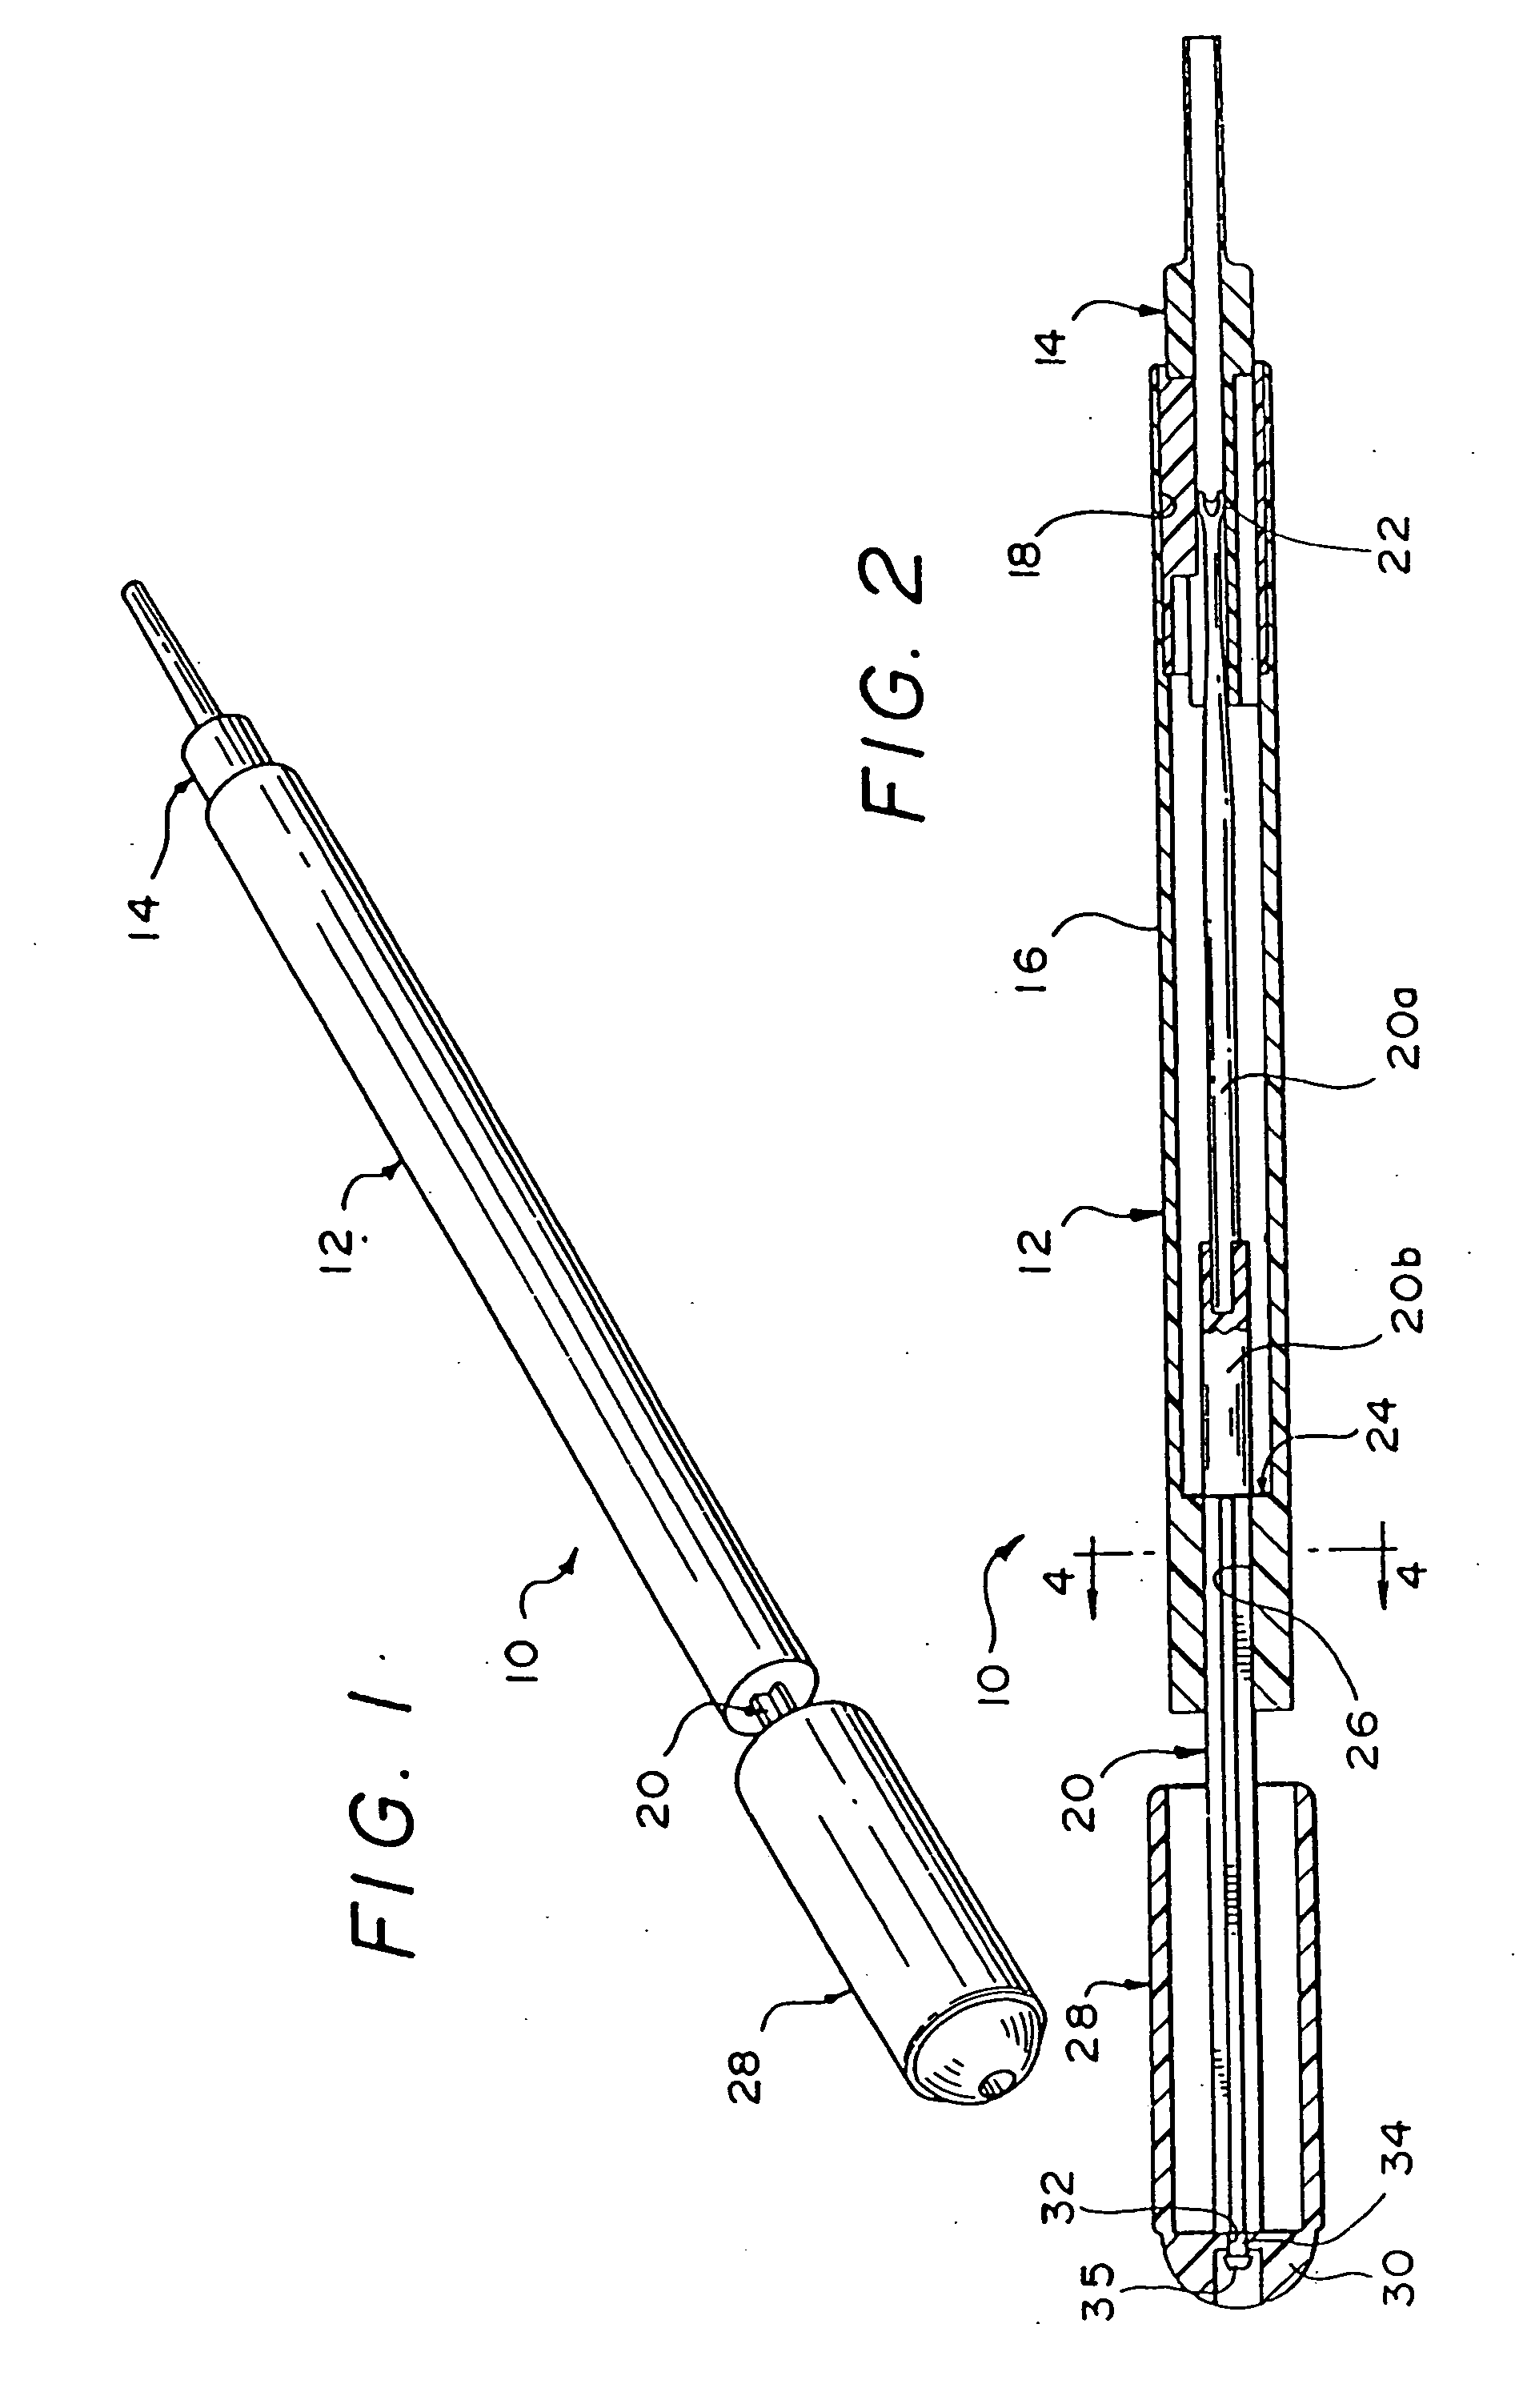 Disposable intraocular lens insertion system